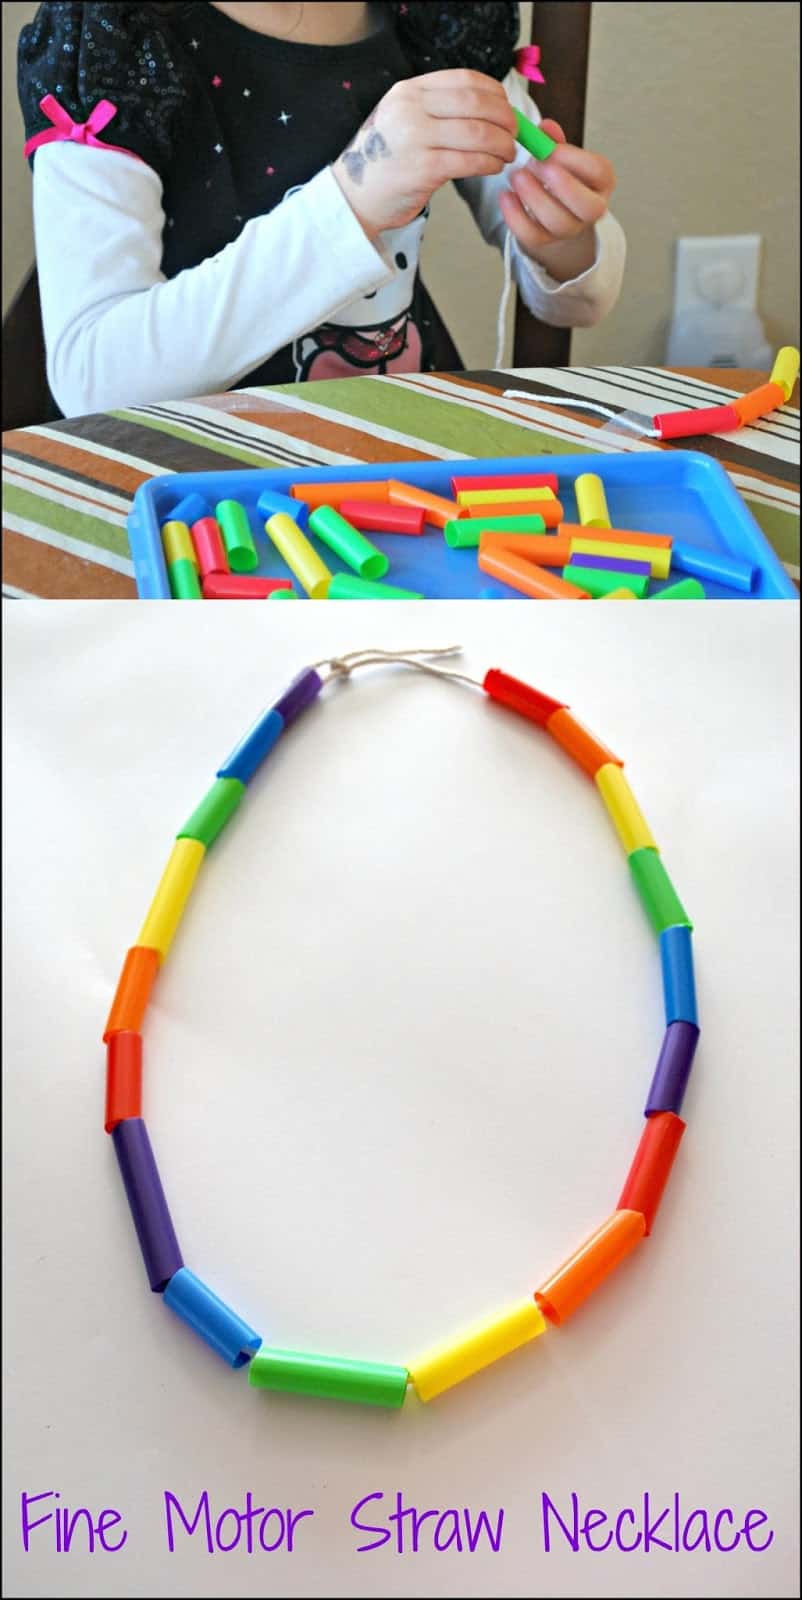 Fine Motor Straw Necklace - create this pretty rainbow necklace while working on fine motor skills.